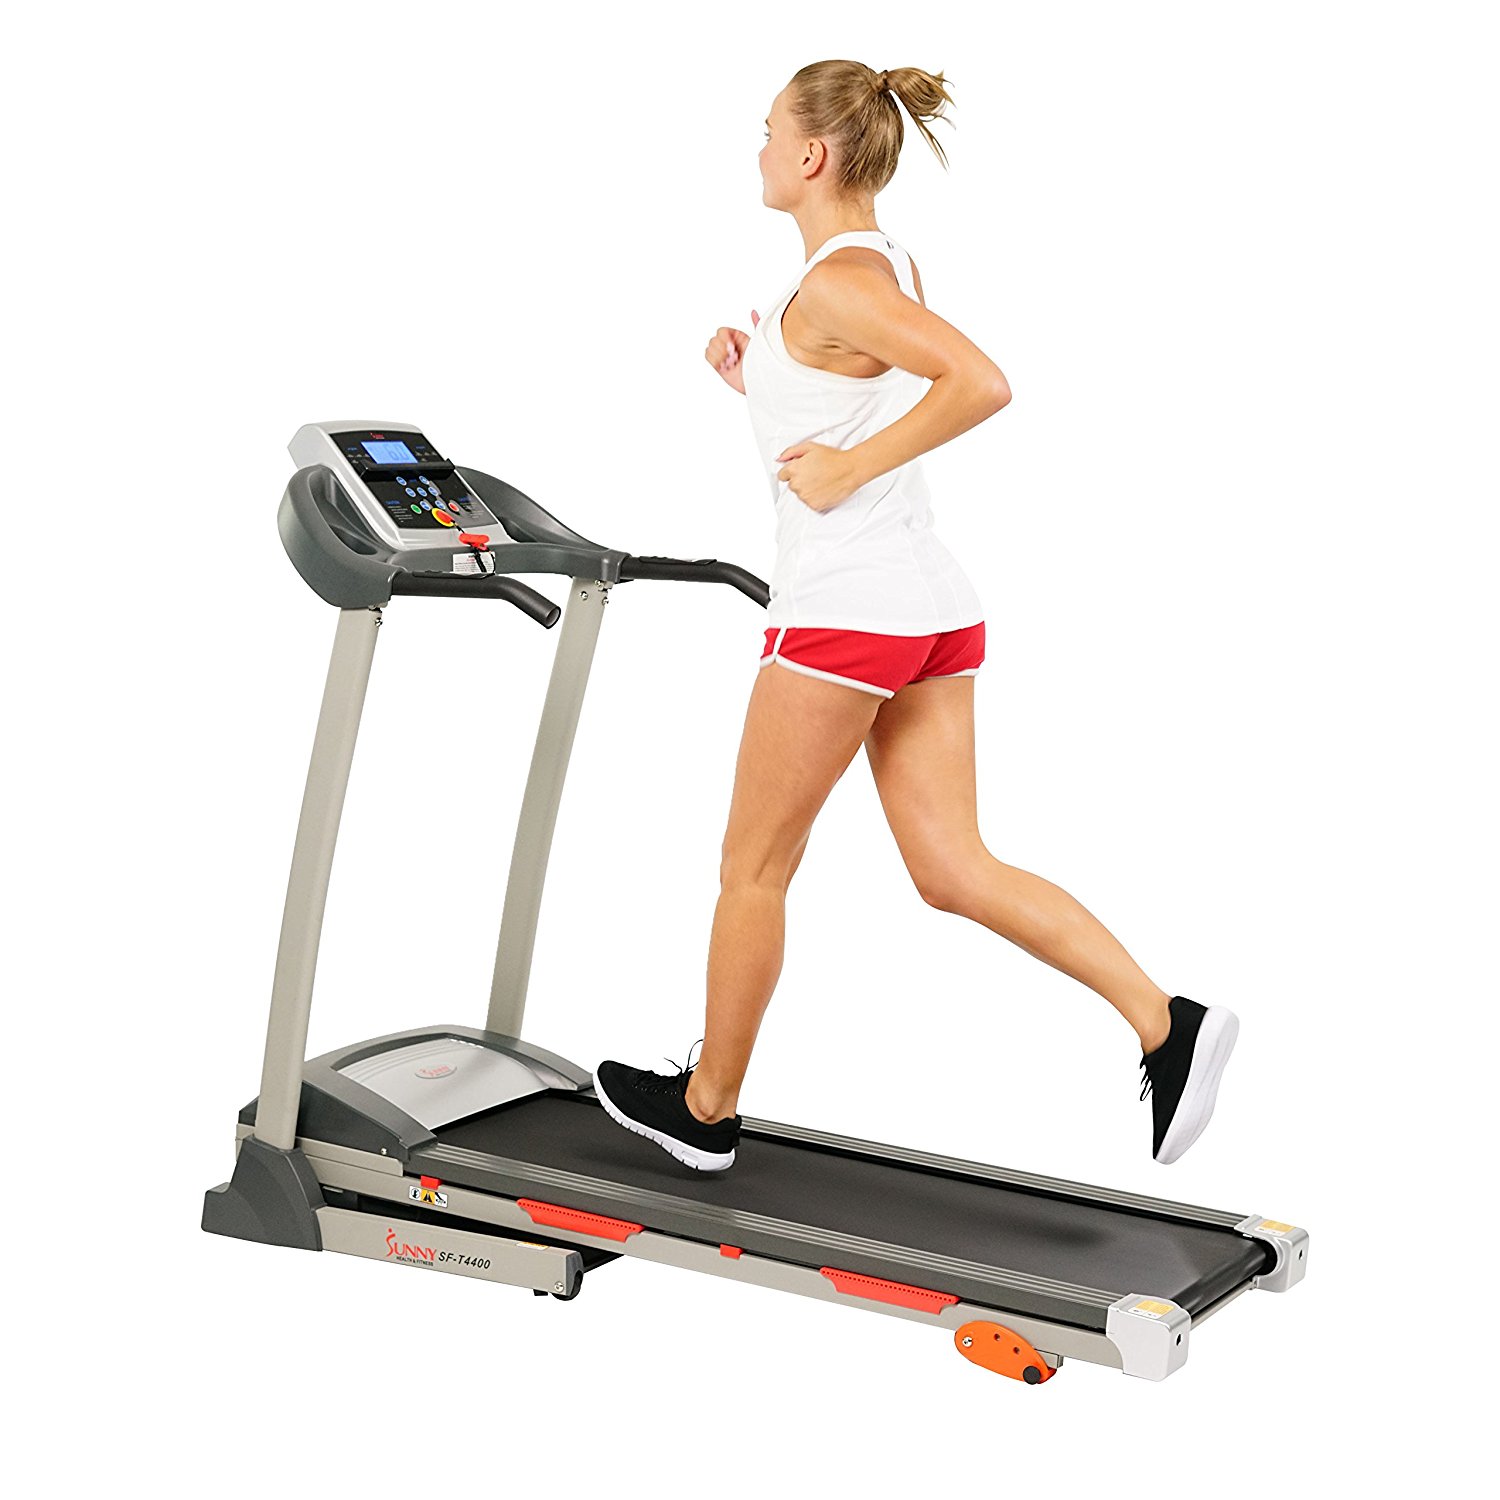 Best Treadmills Under 500 For Your Home Gym Expert 1 Picks (NEW)